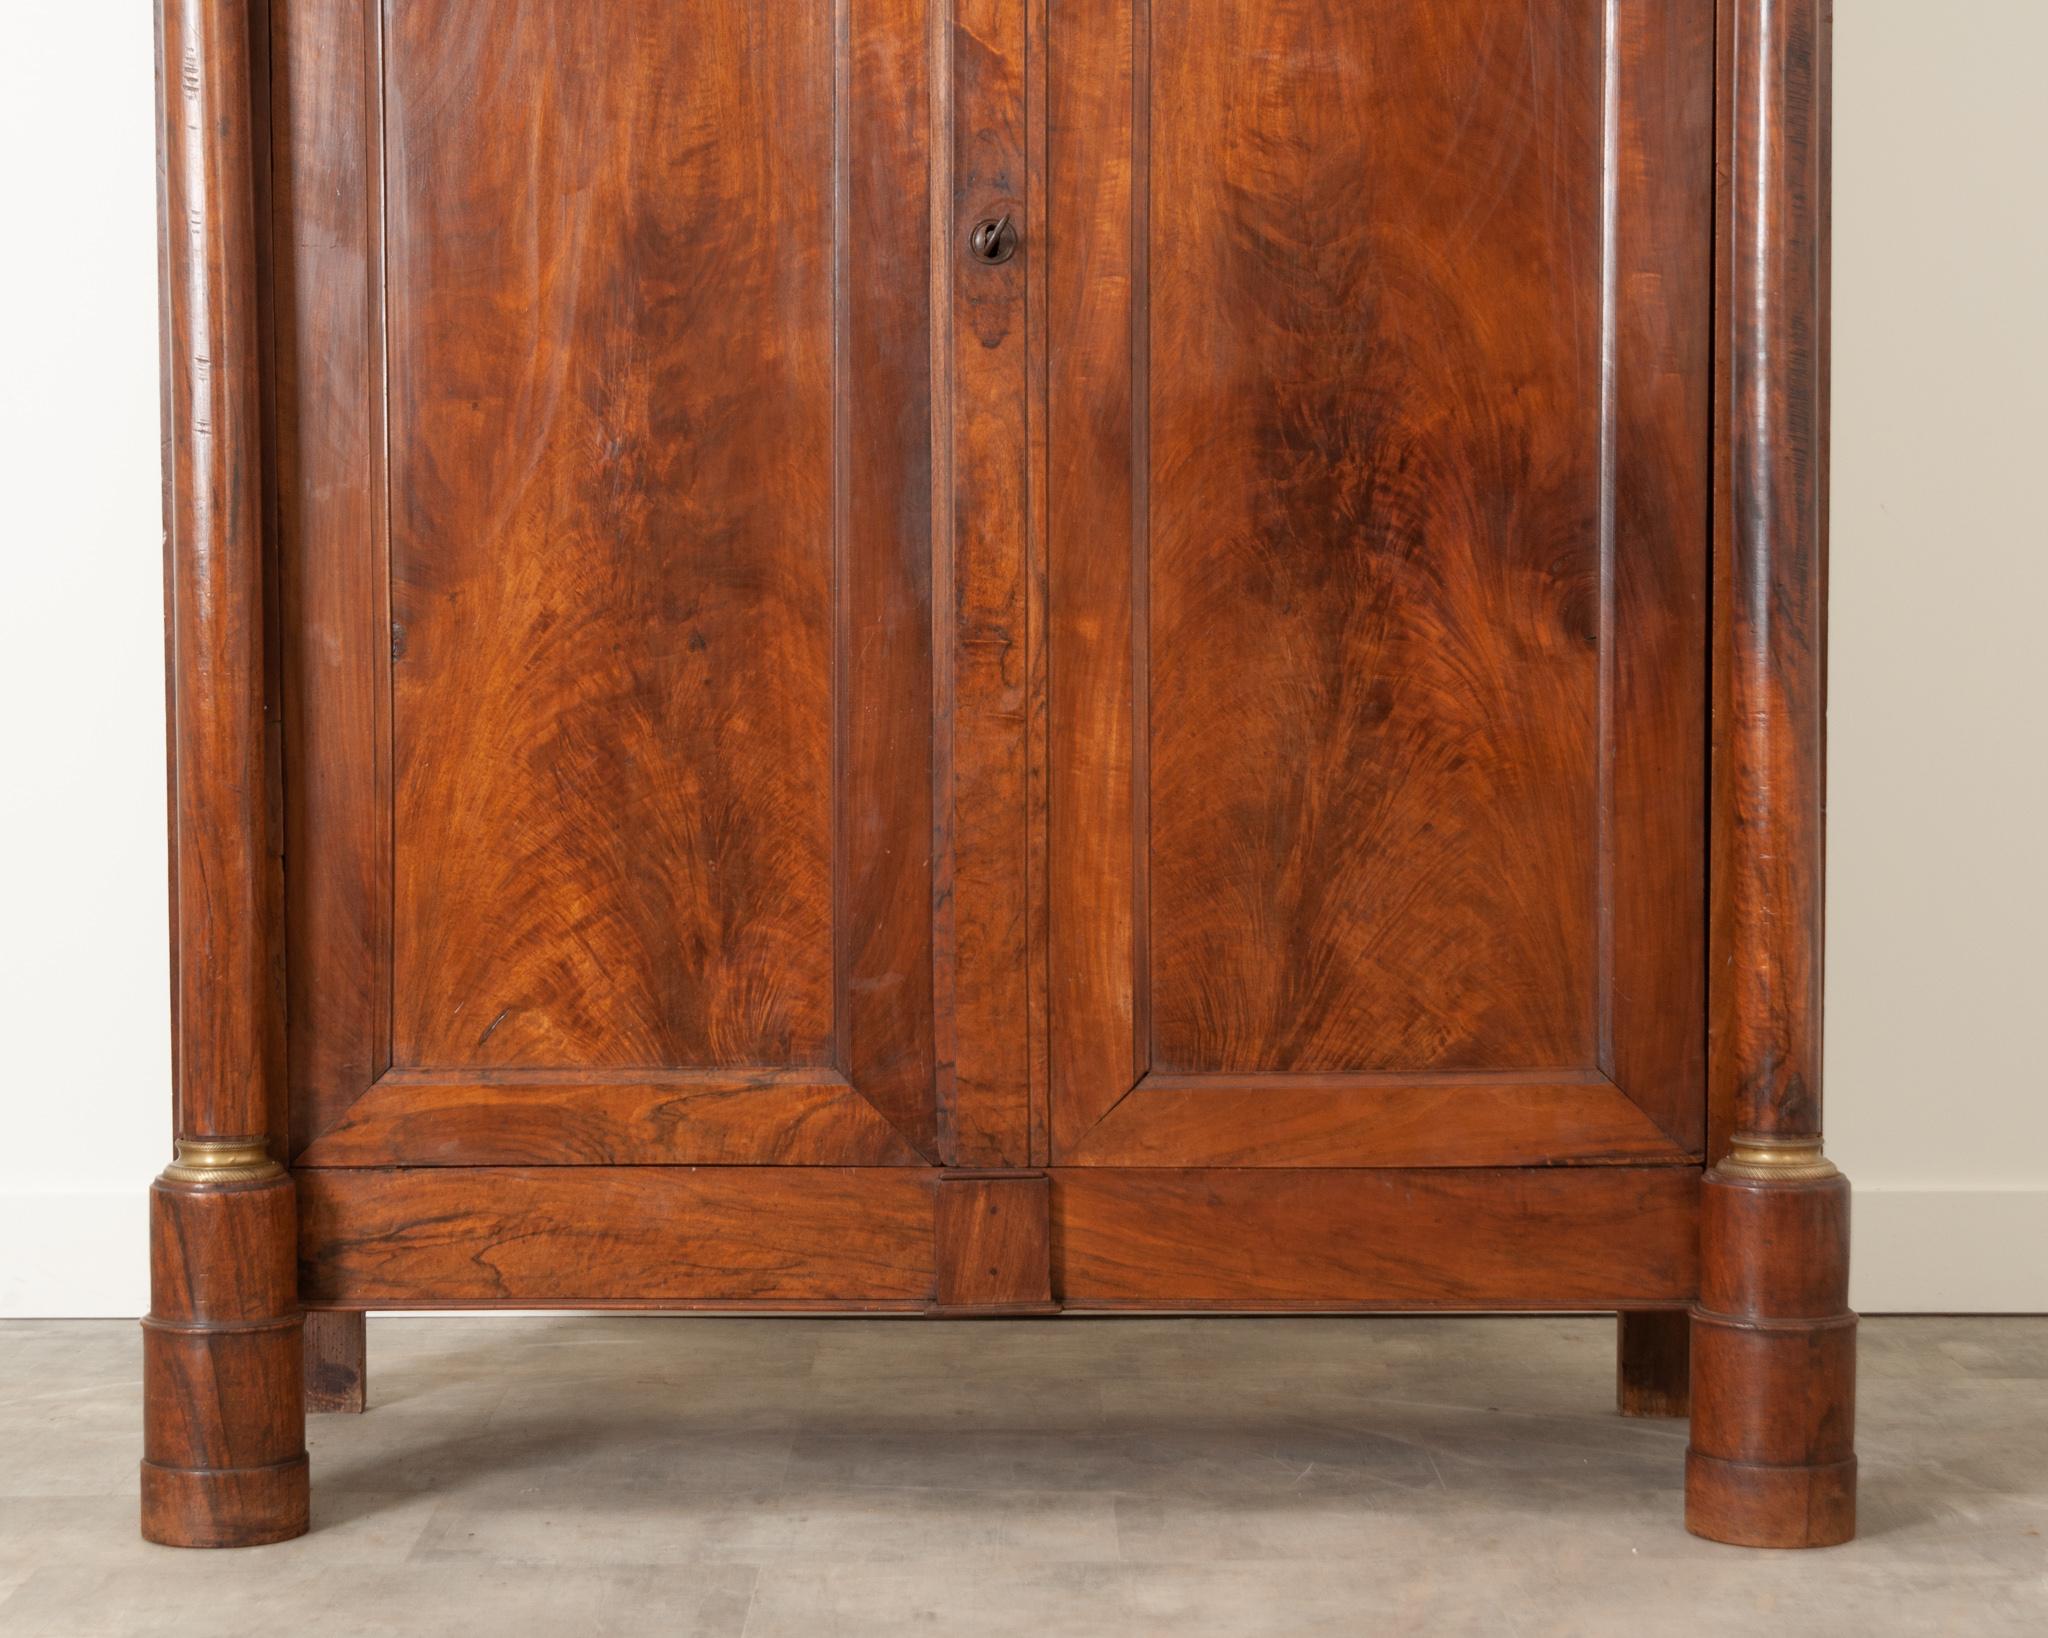 Polished French 19th Century Grand Empire Armoire